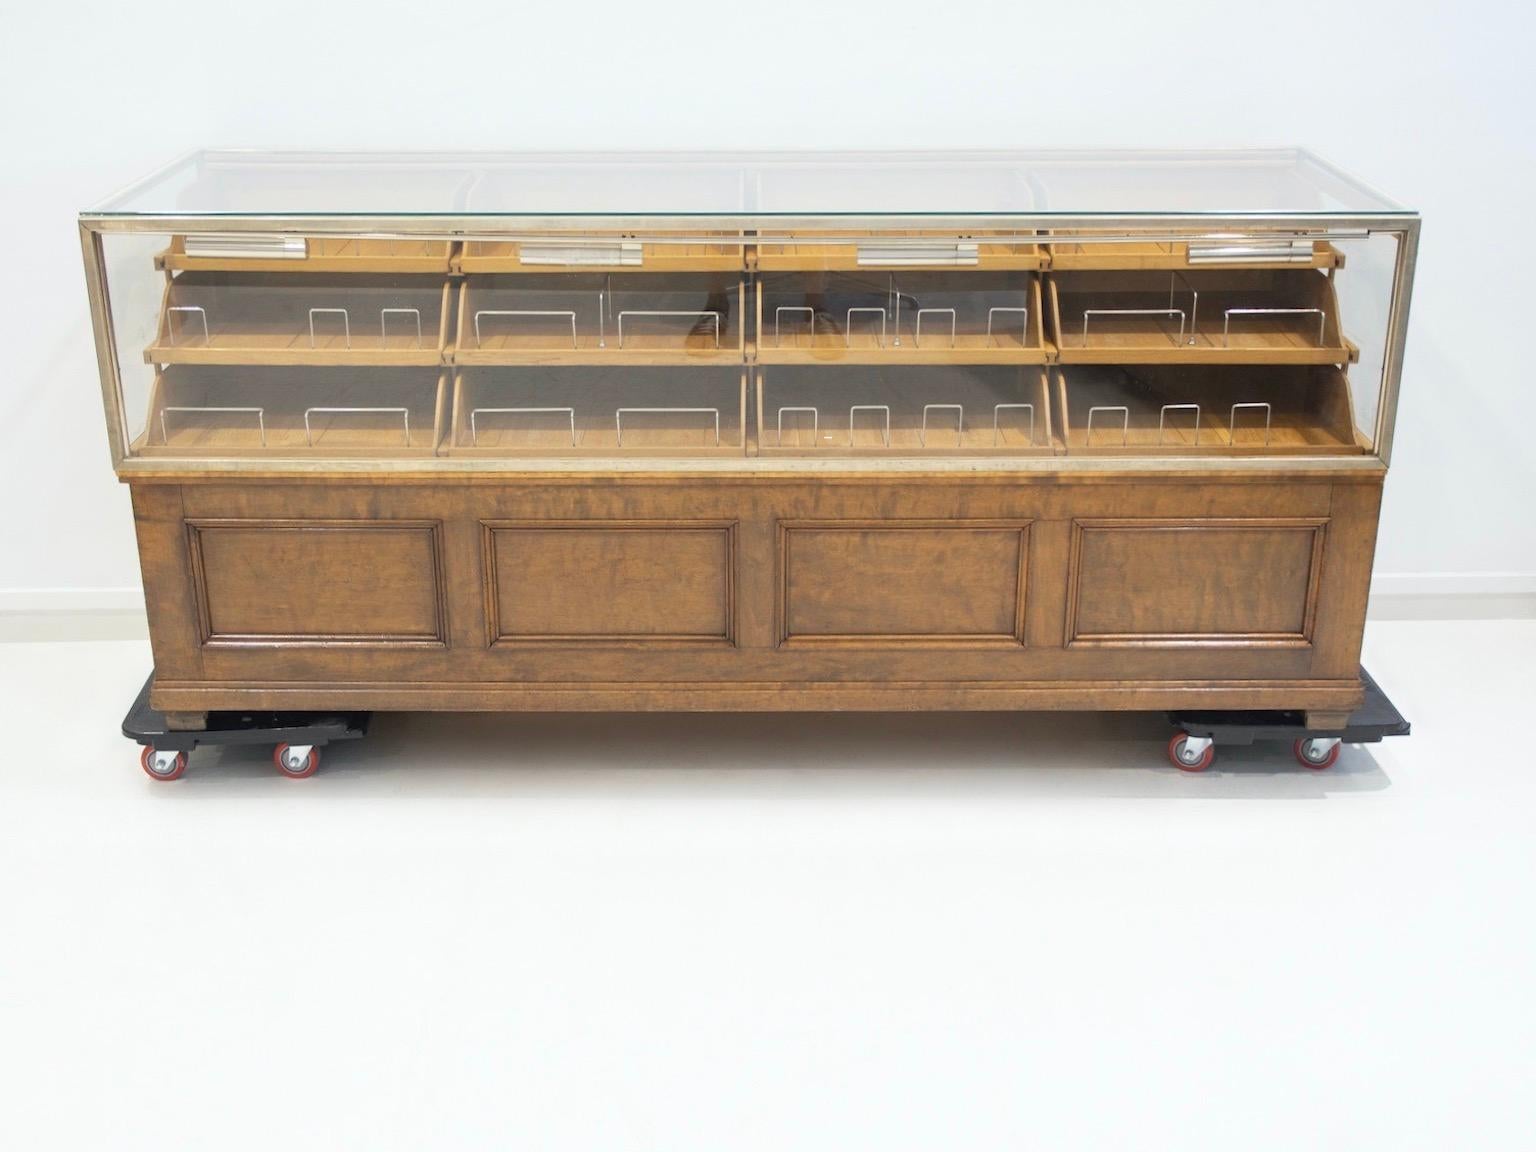 Two-part merchant haberdashery counter made of birch and oak. Glass upper part with interior compartment of ten display drawers and mounting for lighting. Bottom part with ten larger drawers. Aluminum drawer pulls, brass frame and details. 
One